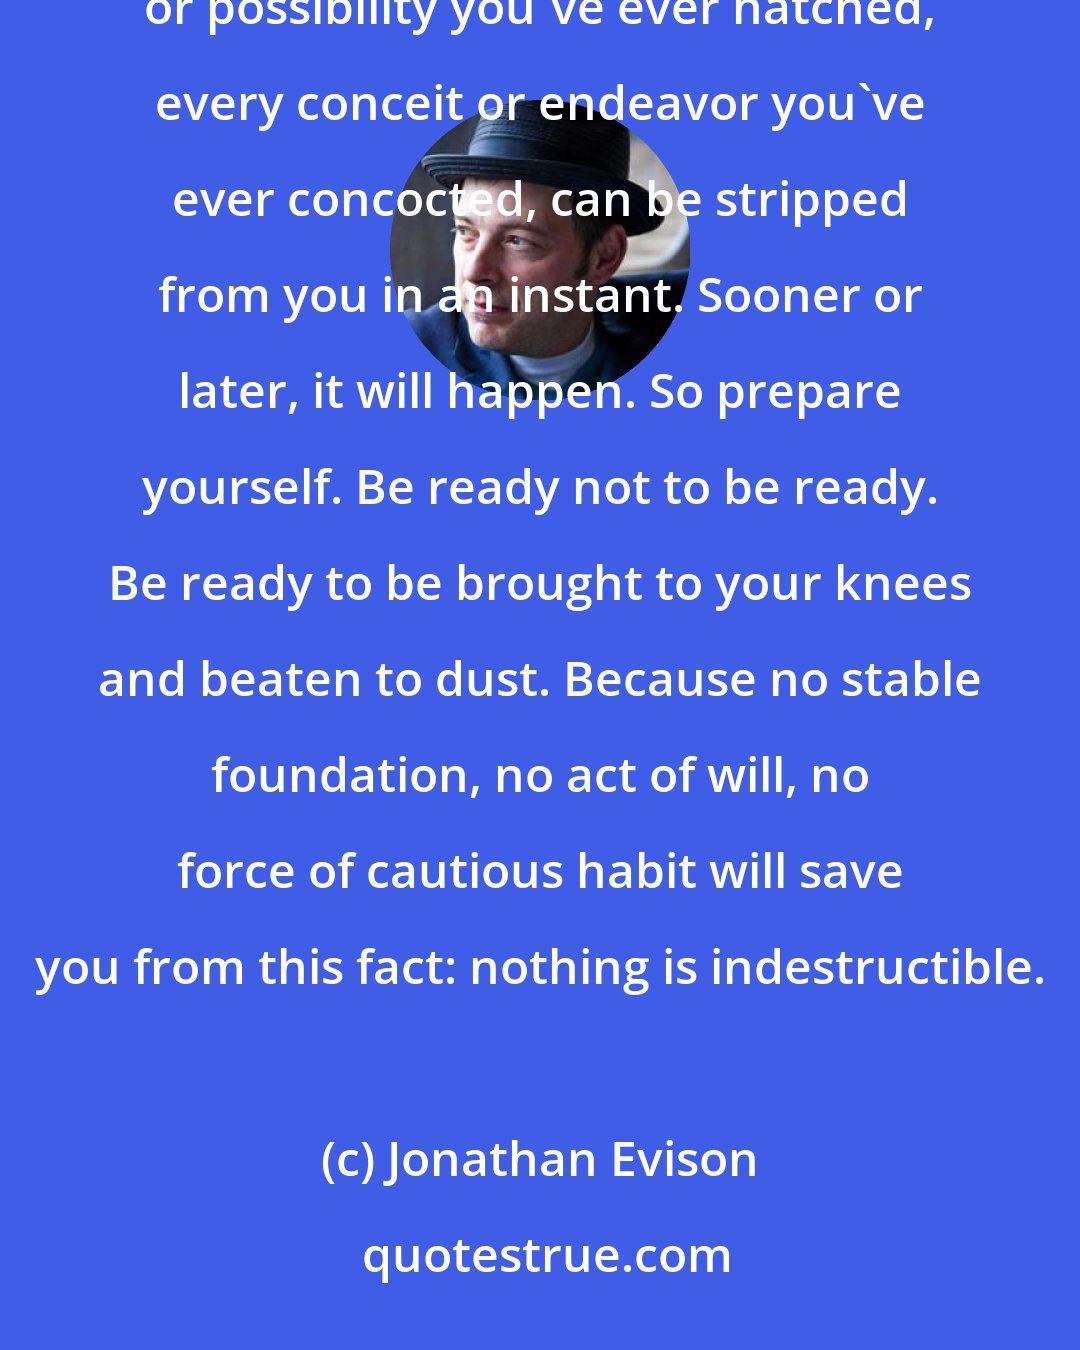 Jonathan Evison: Listen to me: everything you think you know, every relationship you've ever taken for granted, every plan or possibility you've ever hatched, every conceit or endeavor you've ever concocted, can be stripped from you in an instant. Sooner or later, it will happen. So prepare yourself. Be ready not to be ready. Be ready to be brought to your knees and beaten to dust. Because no stable foundation, no act of will, no force of cautious habit will save you from this fact: nothing is indestructible.